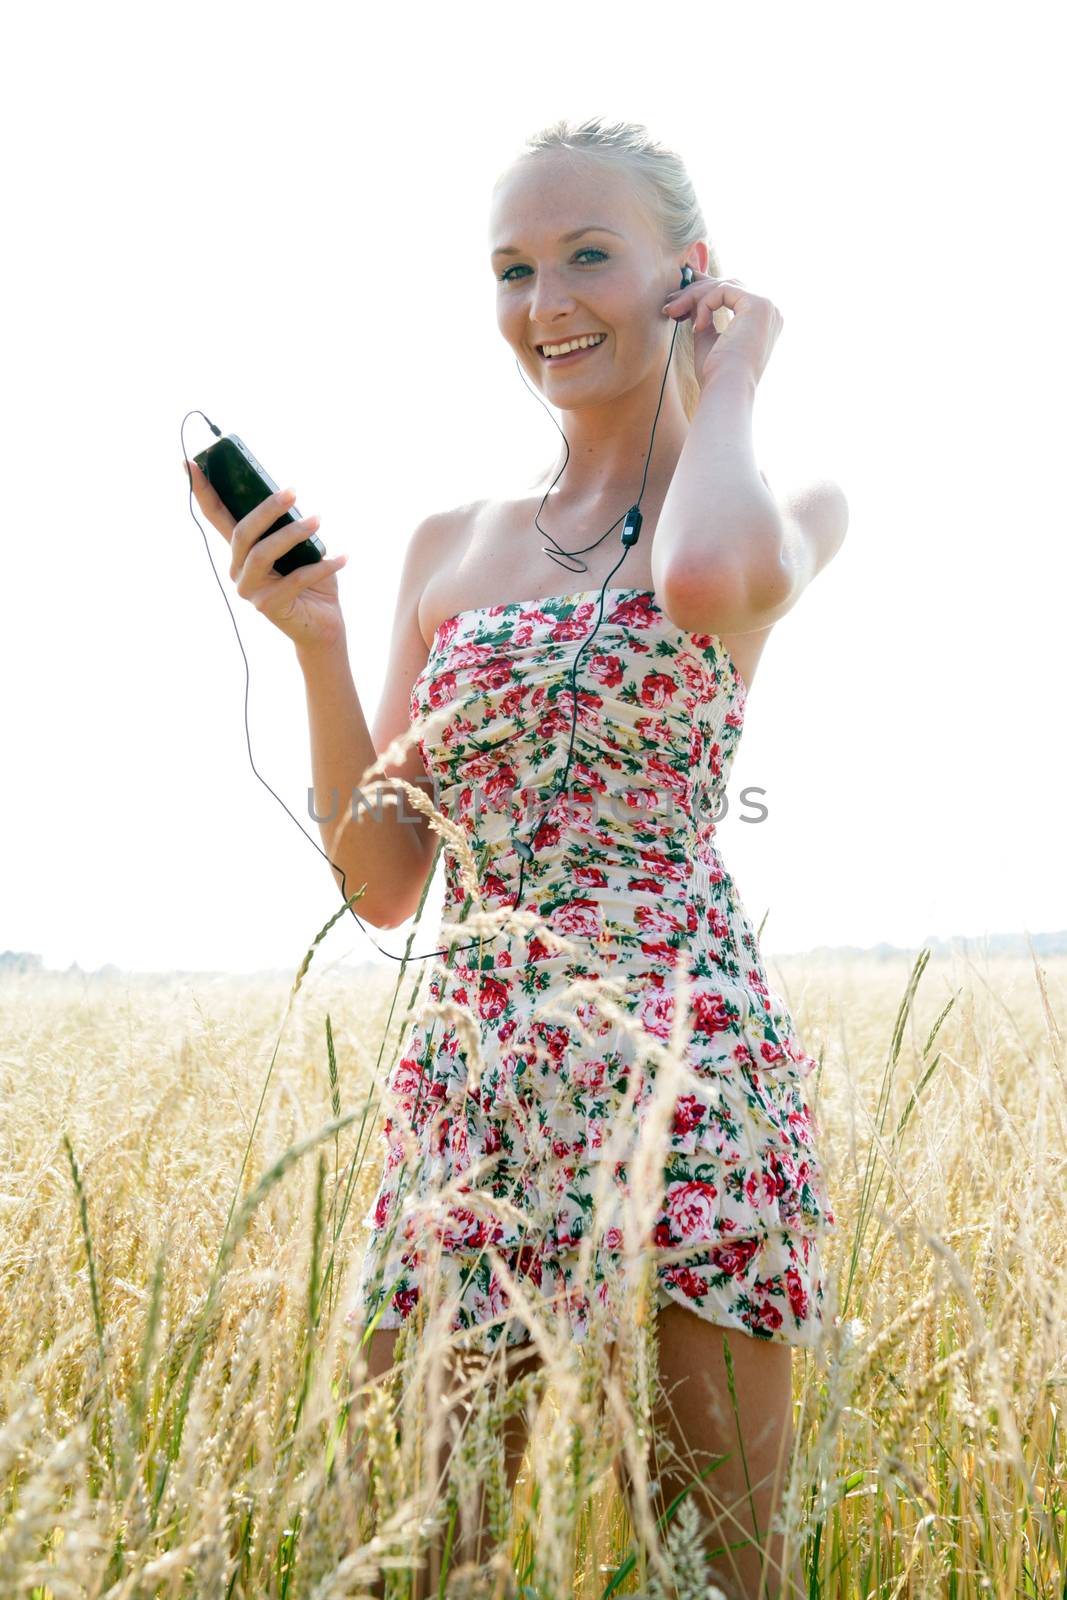 Young attractive woman is standing in a wheat field and listening to music with her smartphone. She looks happy and relaxed.